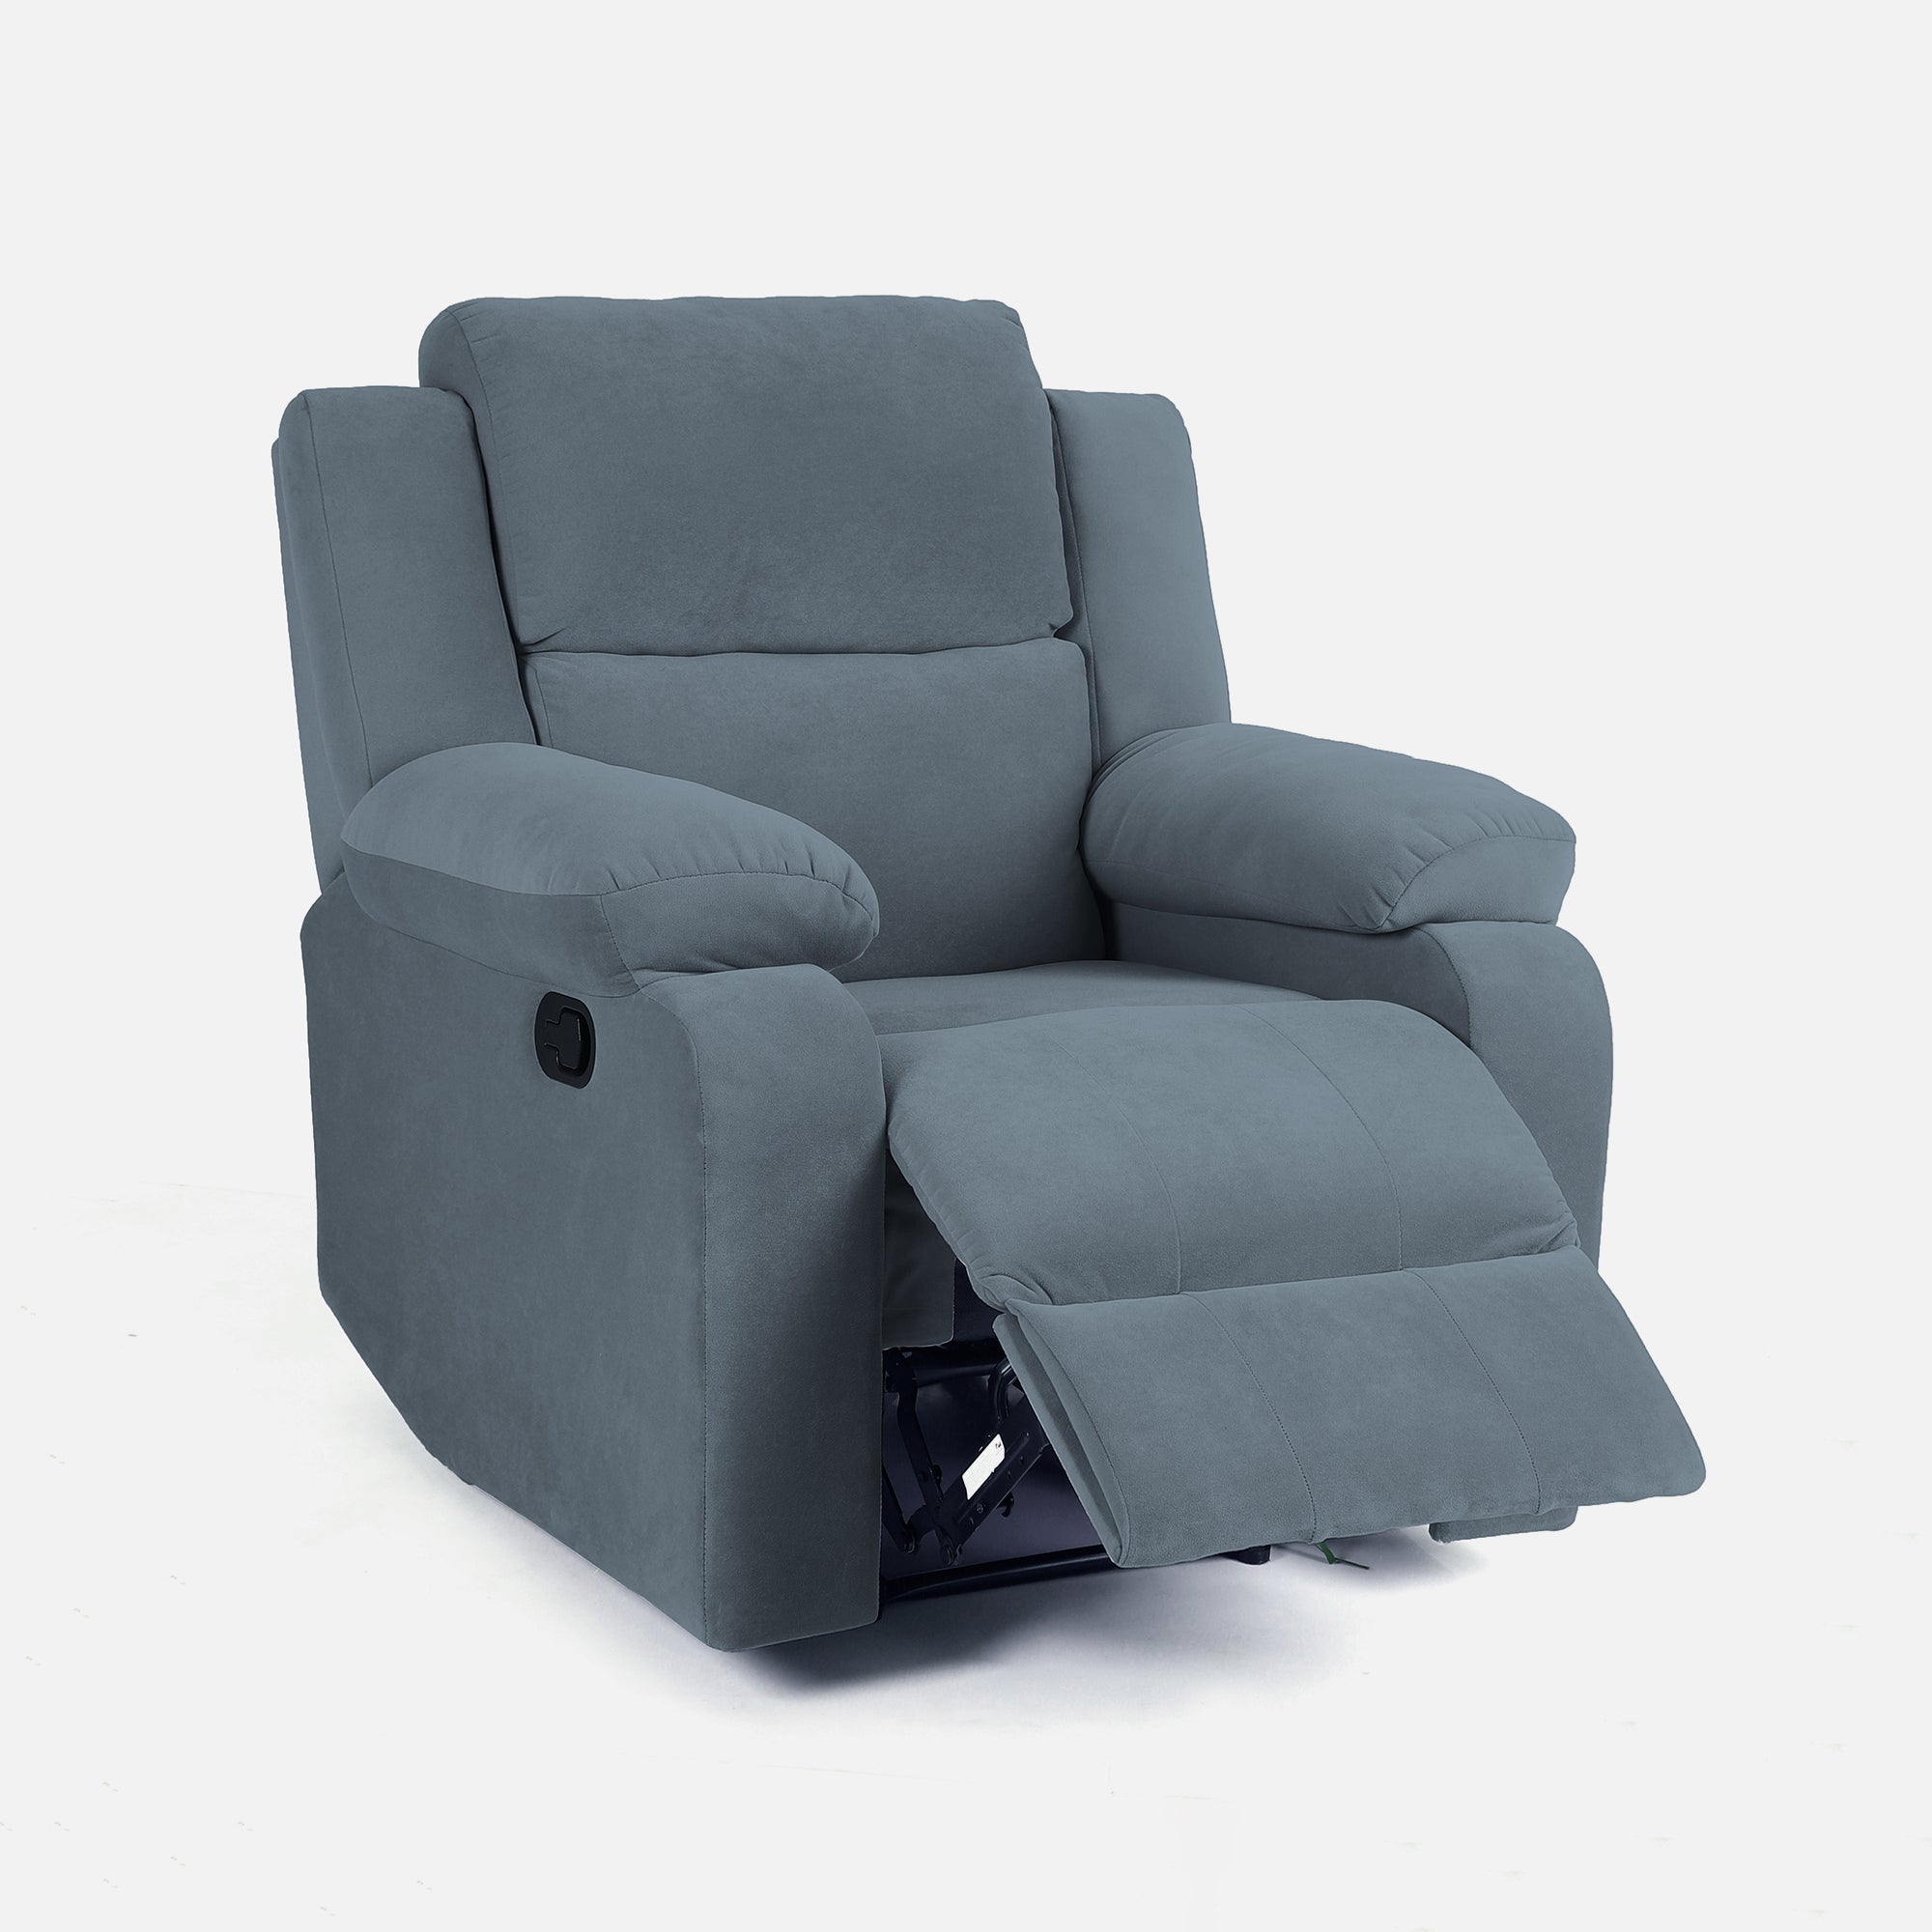 Green Soul Comfy Fabric Single Seater Recliner